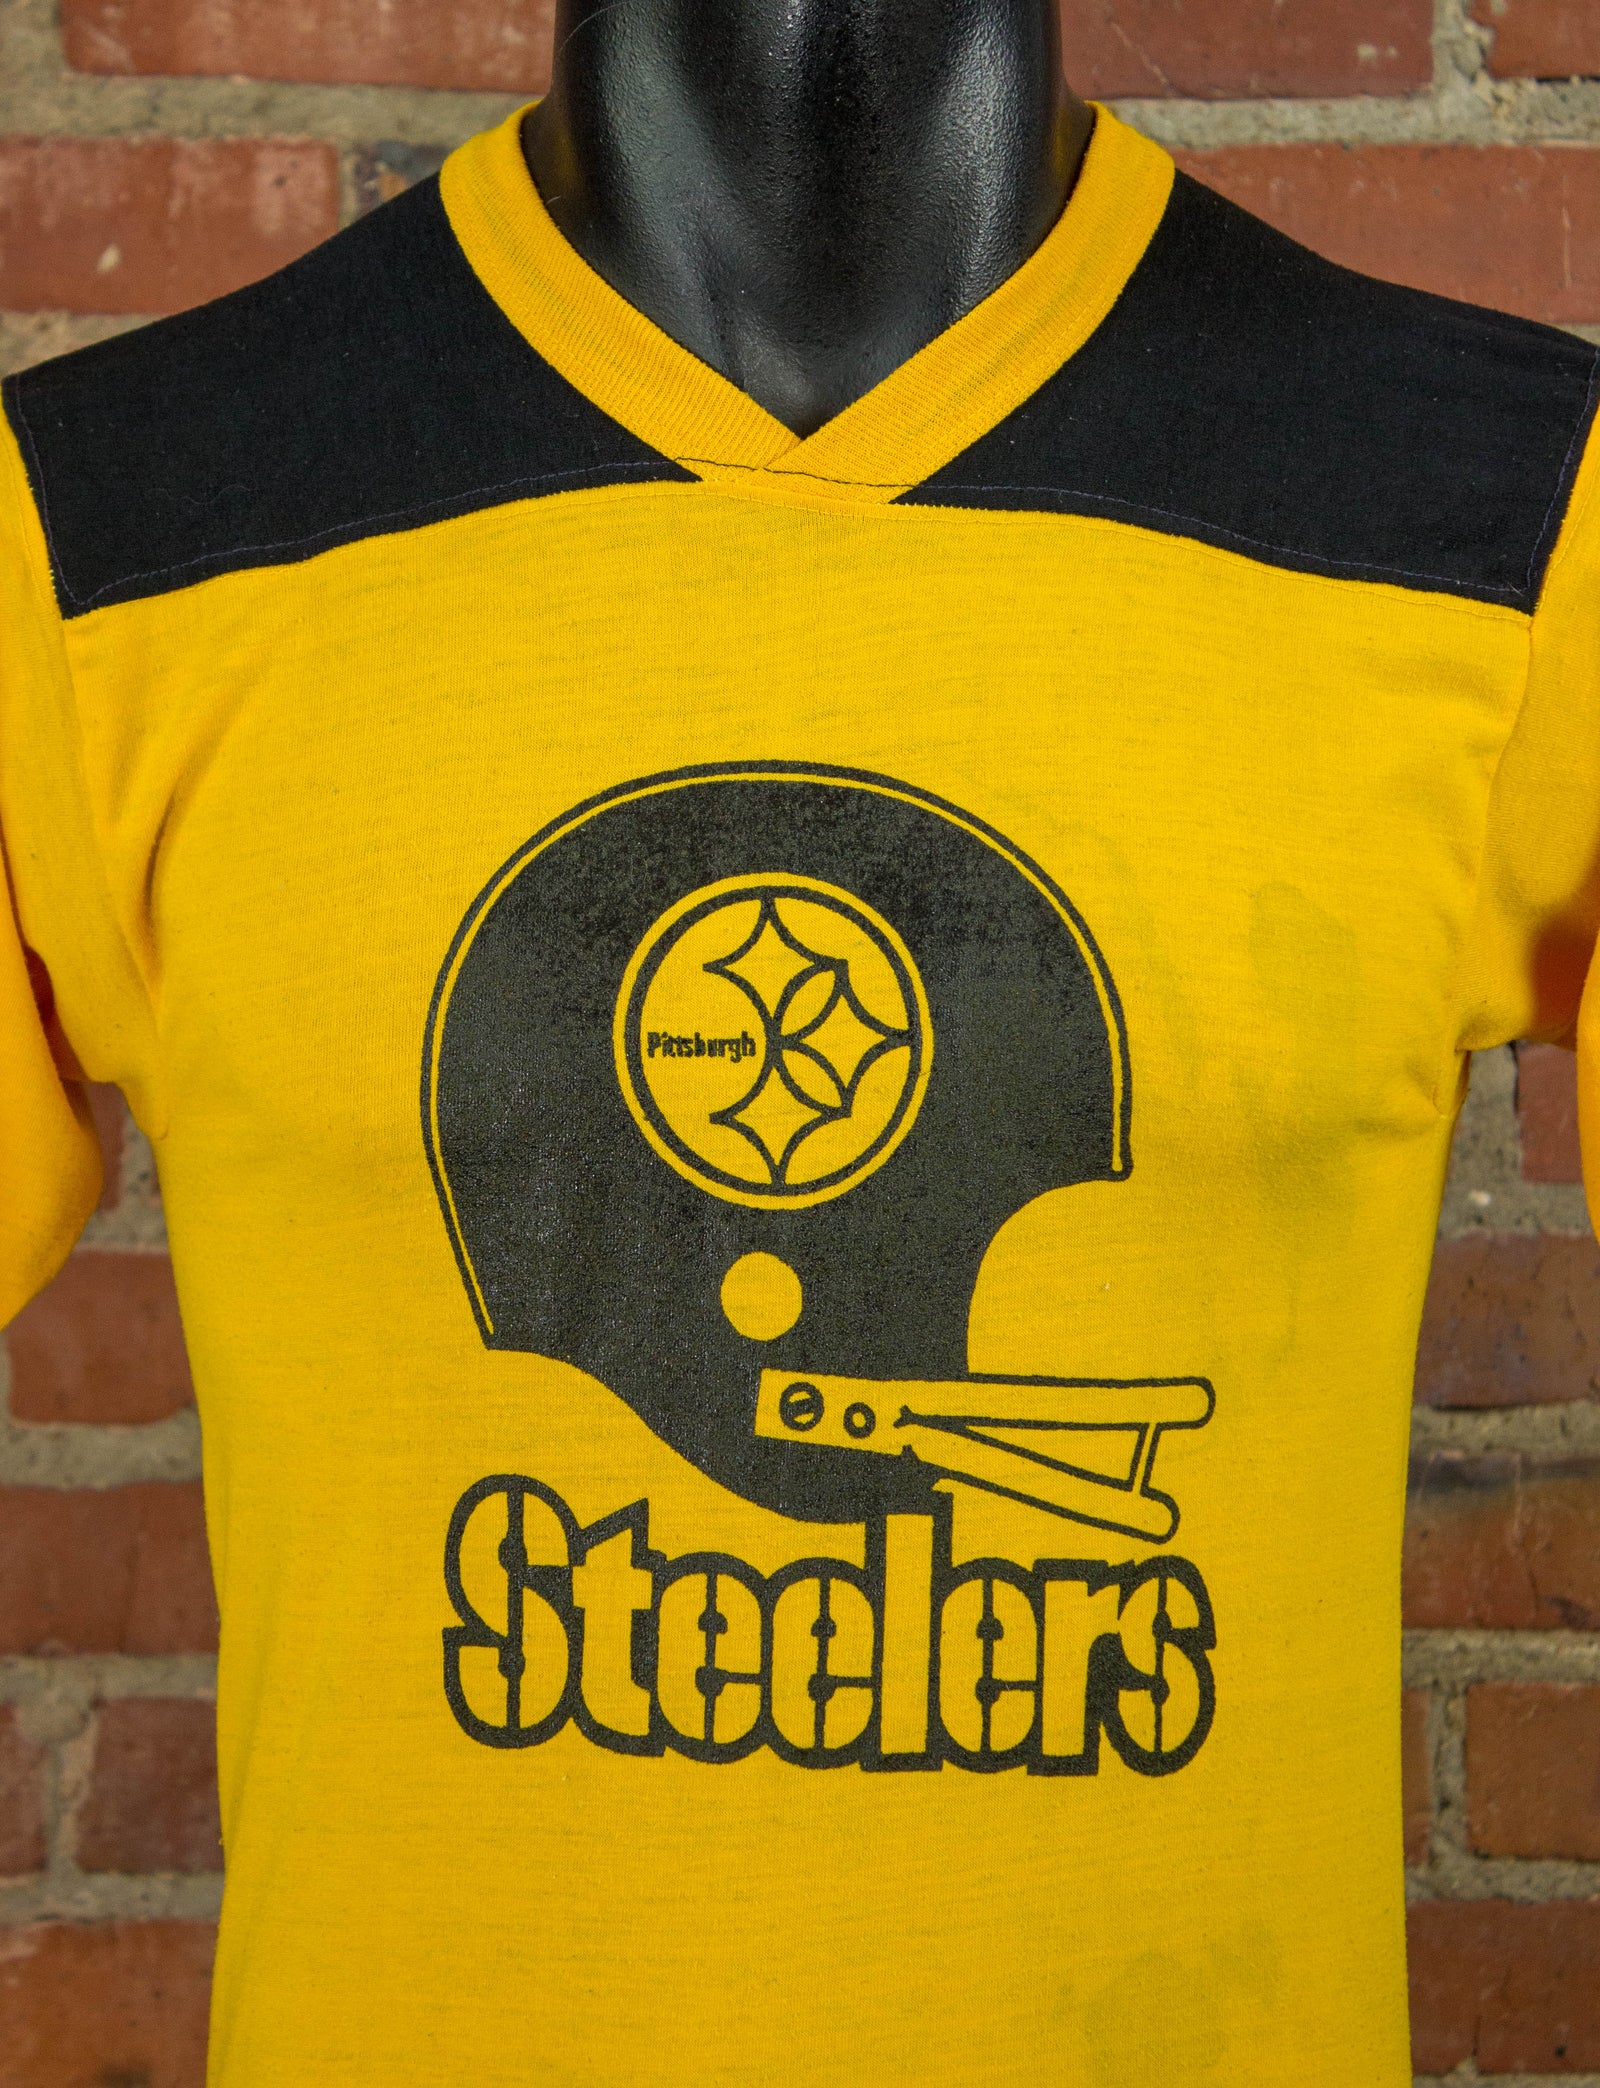 Vintage 70s Pittsburgh Steelers Black and Yellow Football Jersey Style –  Black Shag Vintage